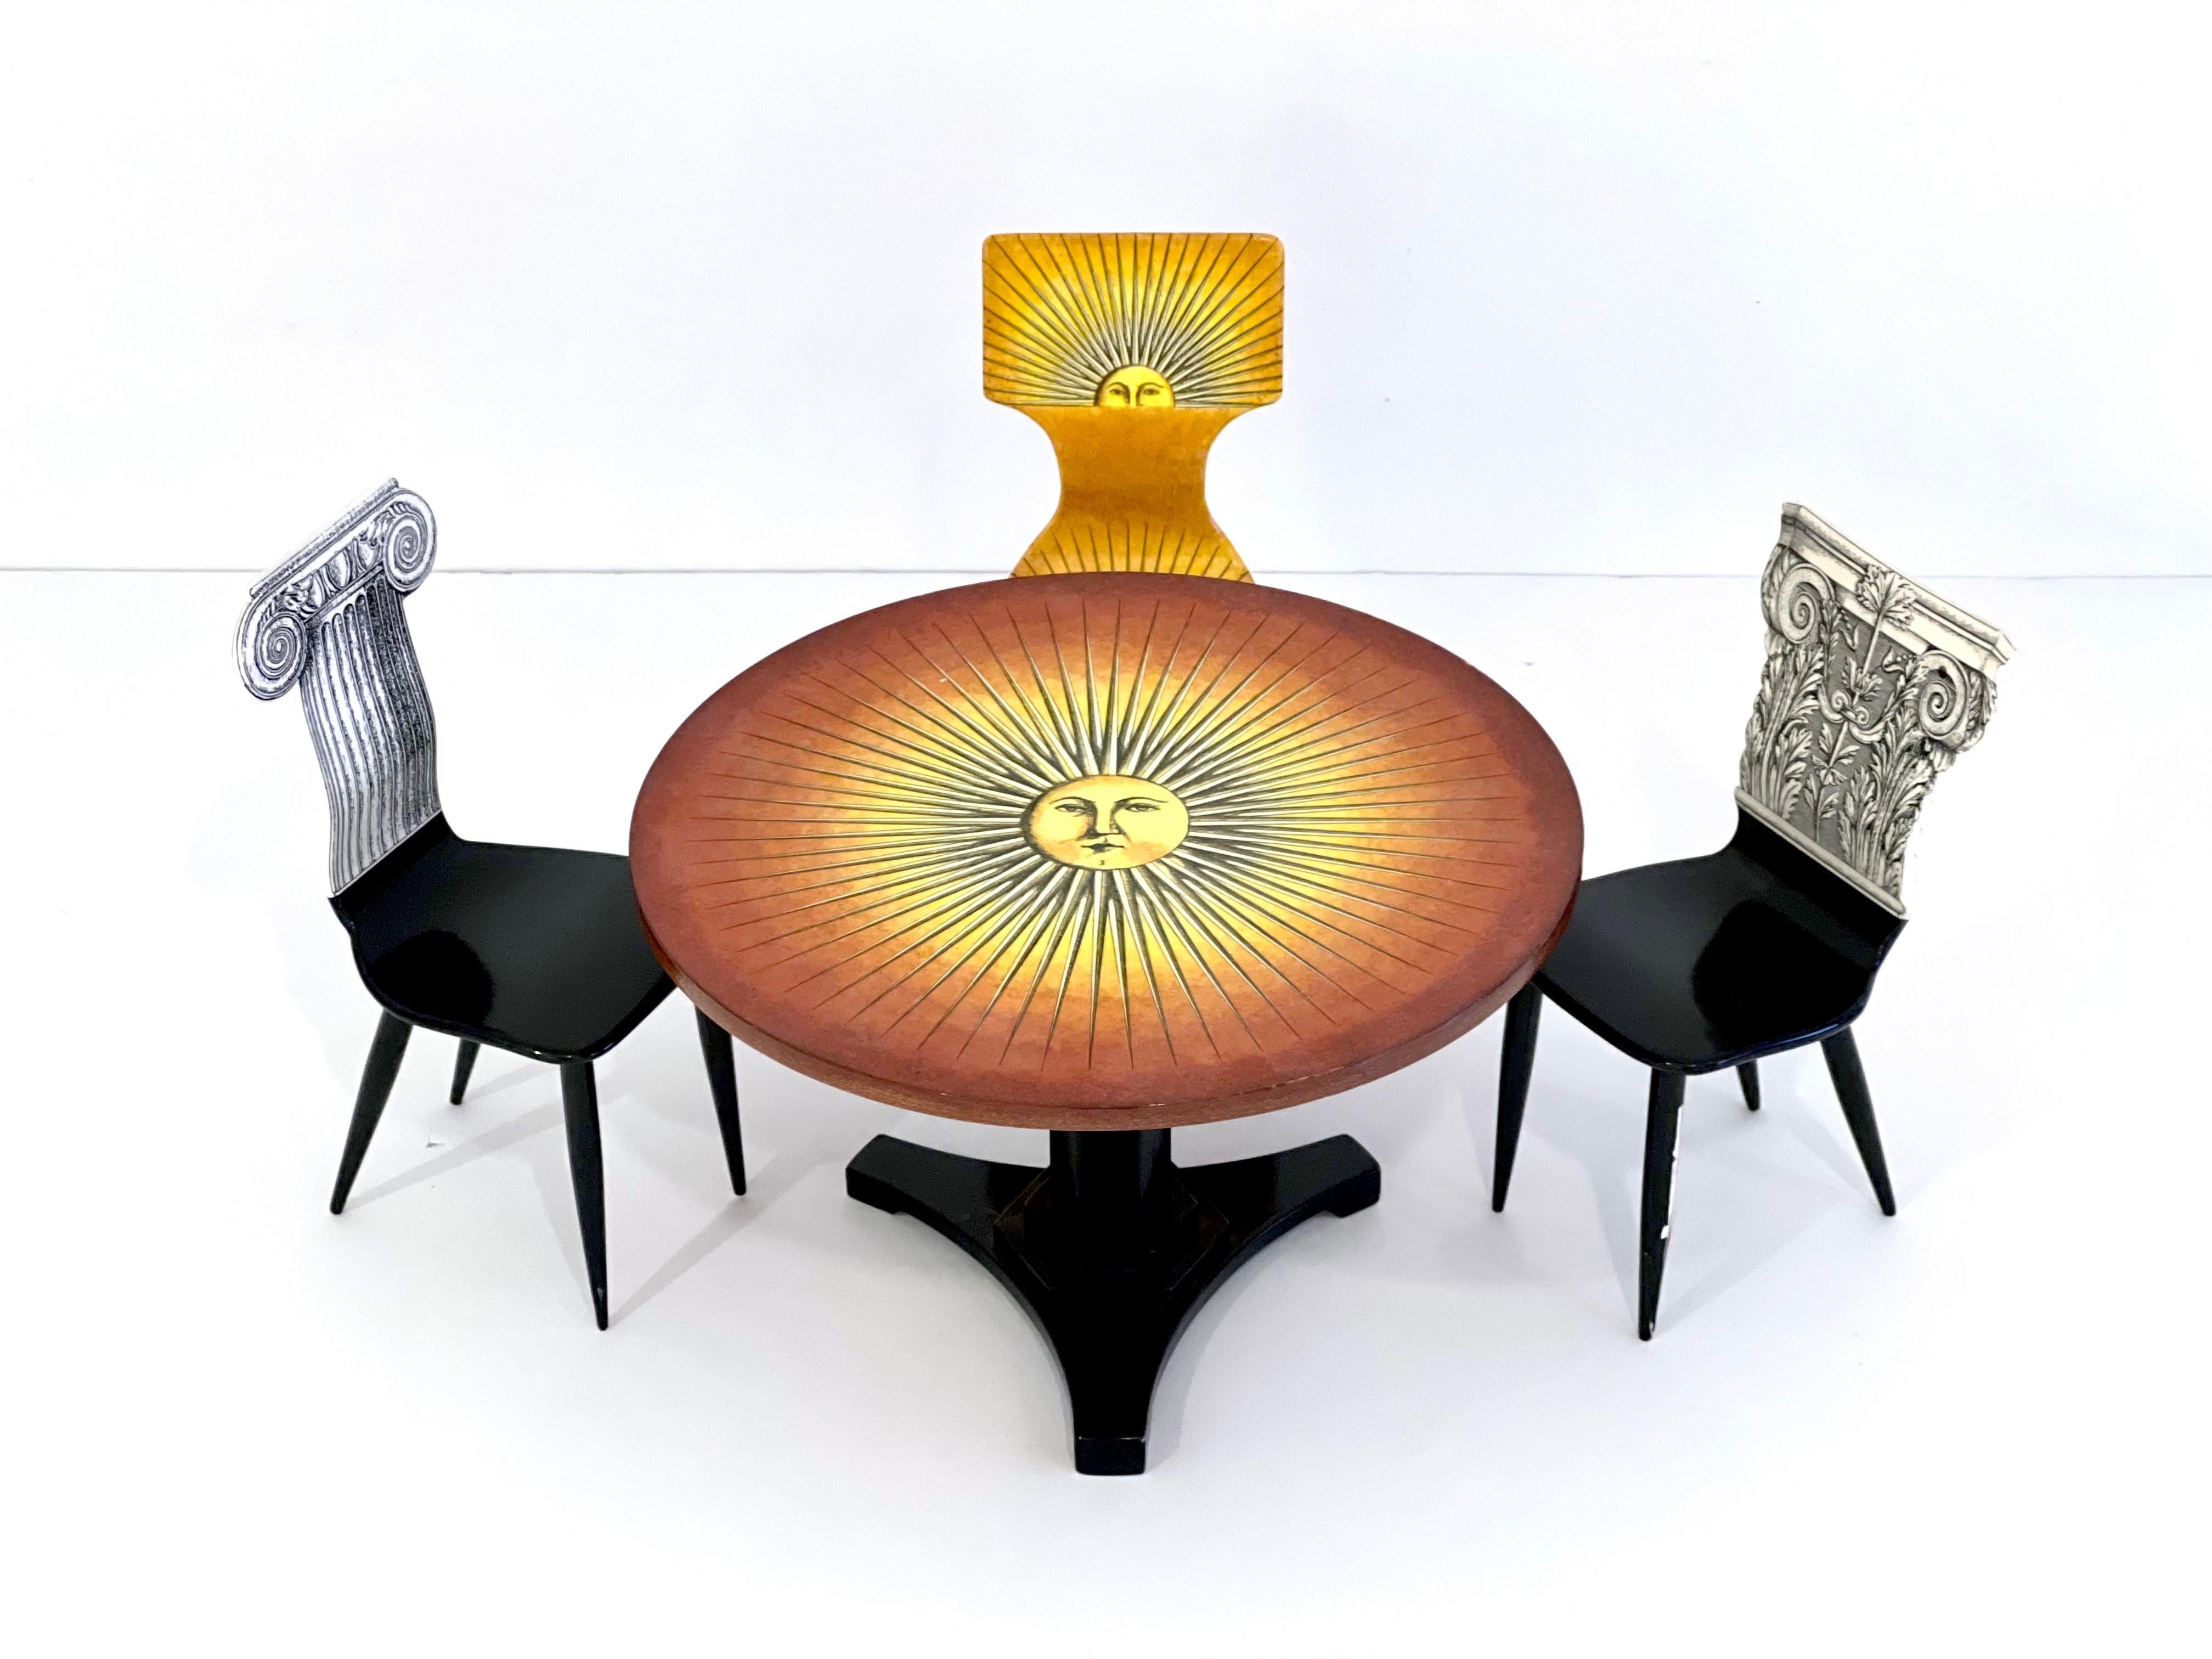 Rare and spectacular set of Miniature Prototype Table and Chairs by Piero Fornasetti, Italy circa 1970's. The chairs are stamped 'Fornasetti Milano' on the underside. 
The measurements listed are for the table. 
The chairs measure approx. 9.5